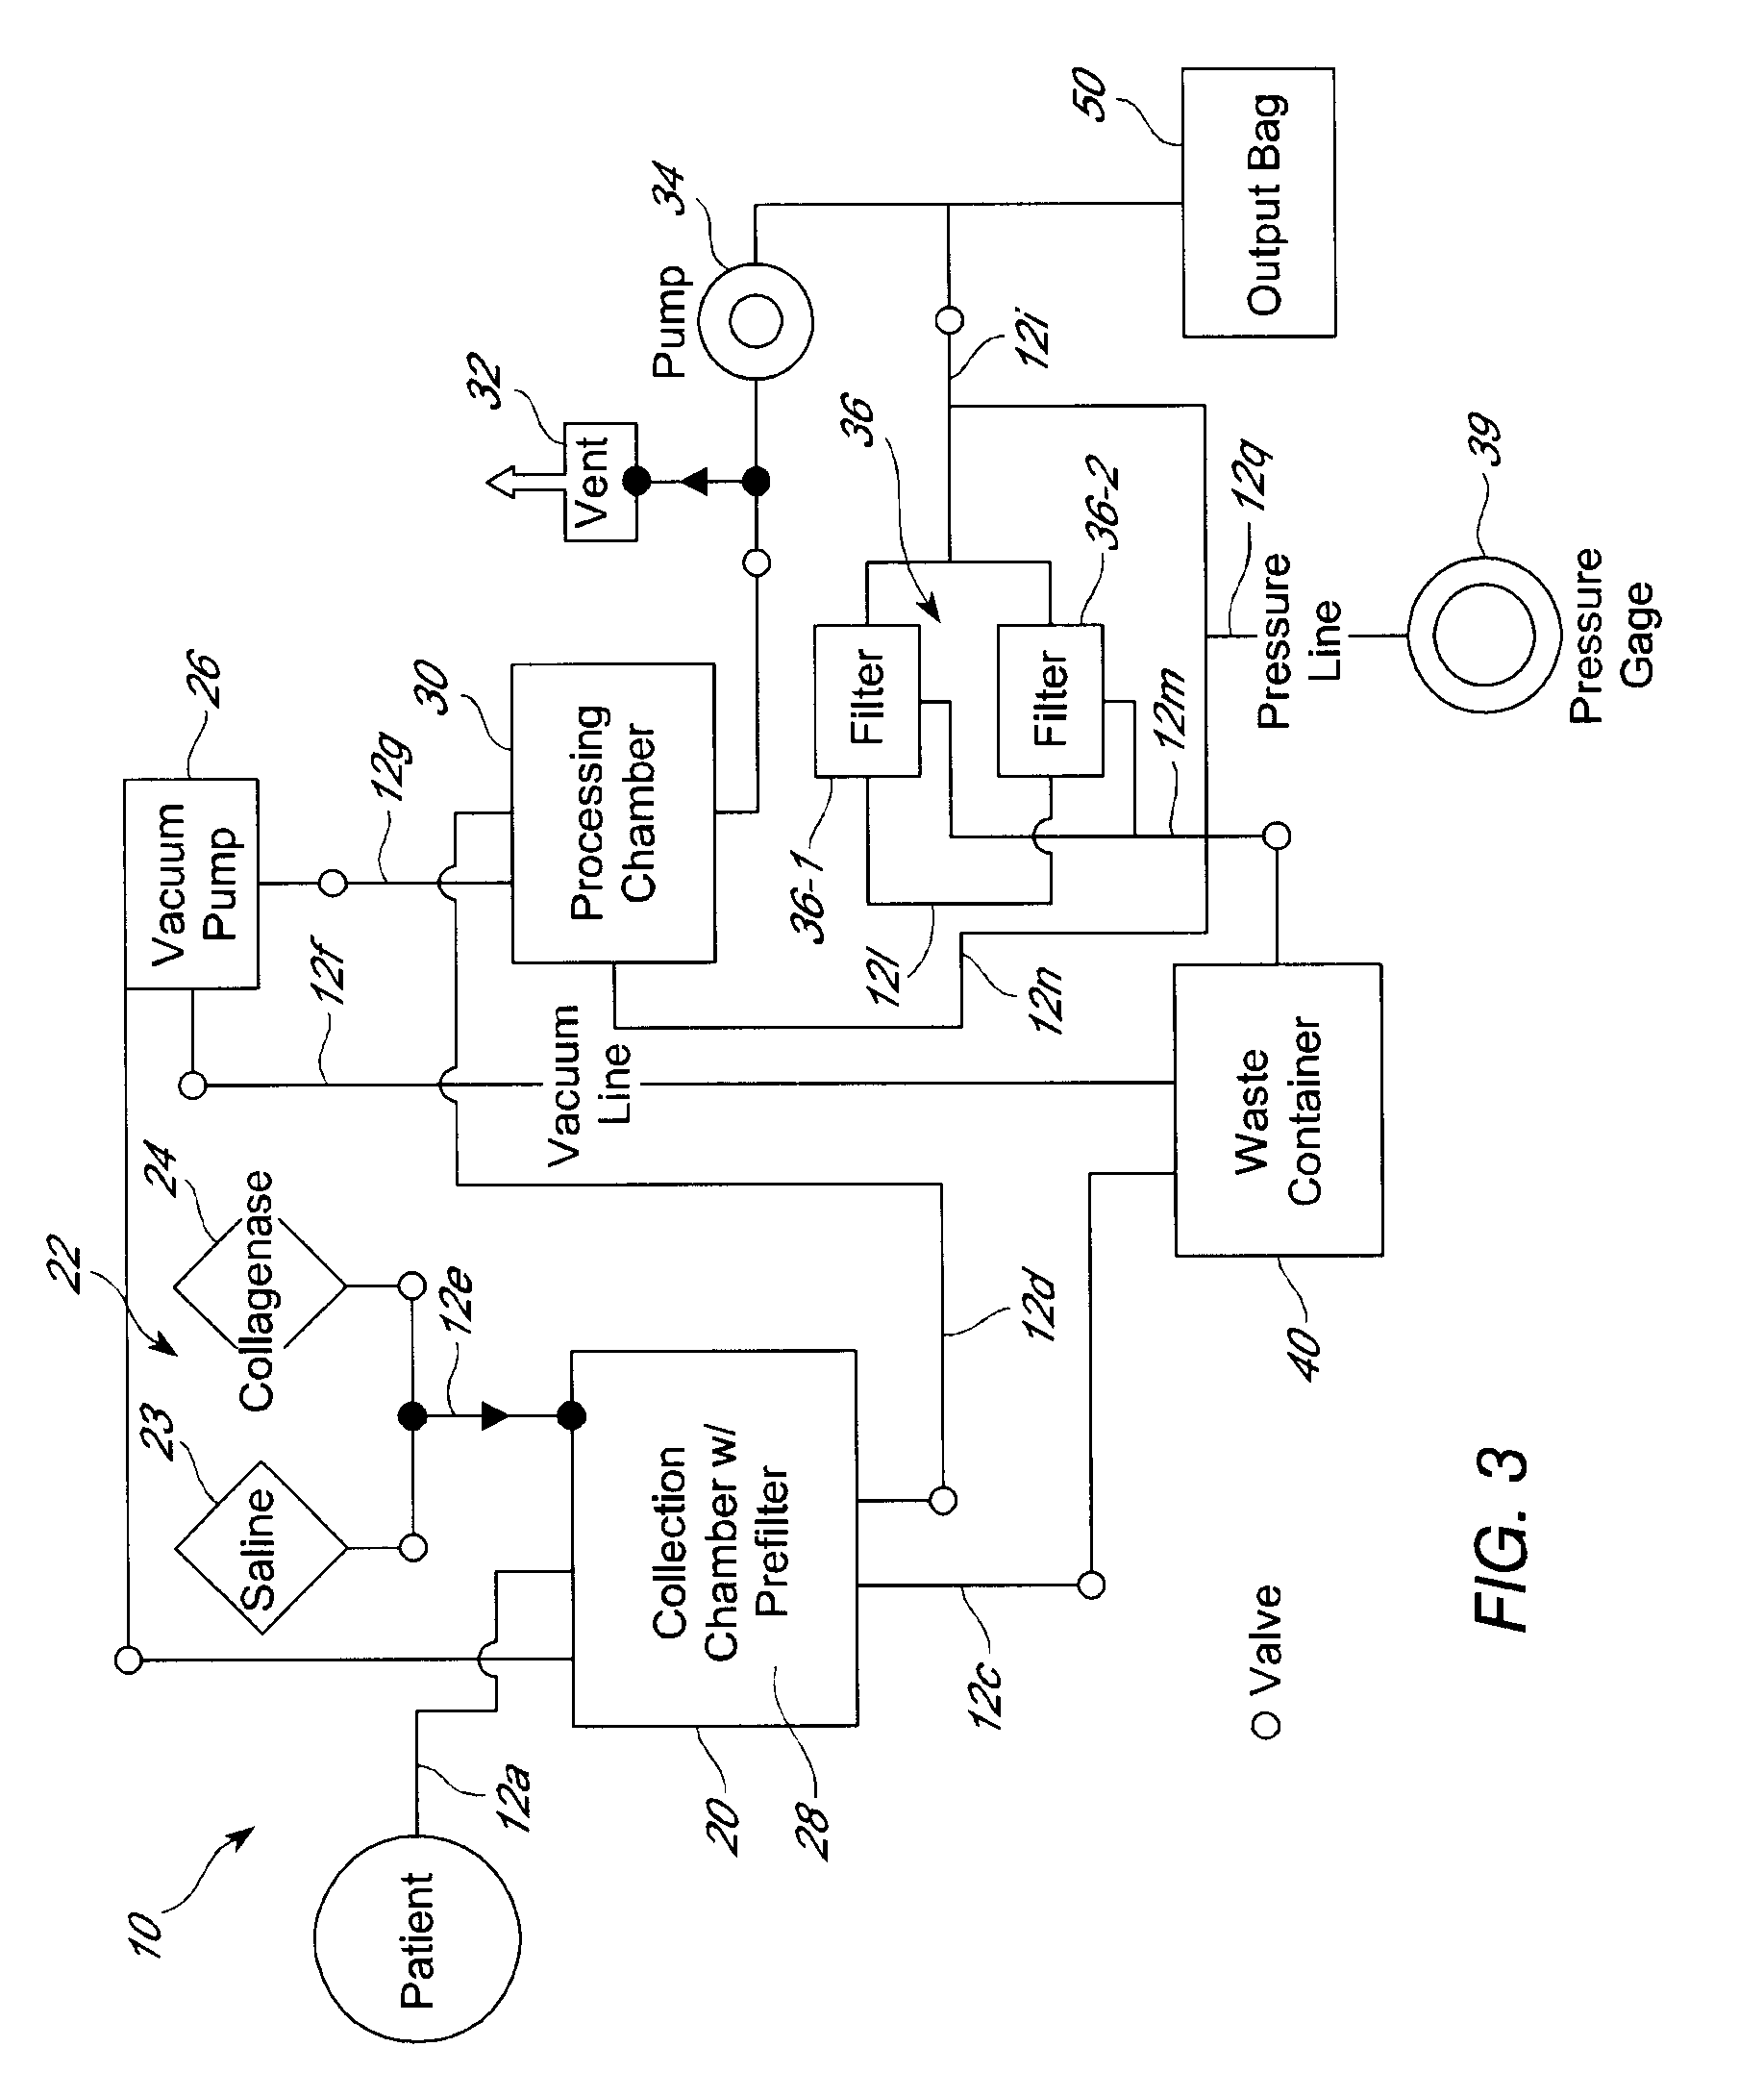 Methods of using adipose derived stem cells to promote wound healing